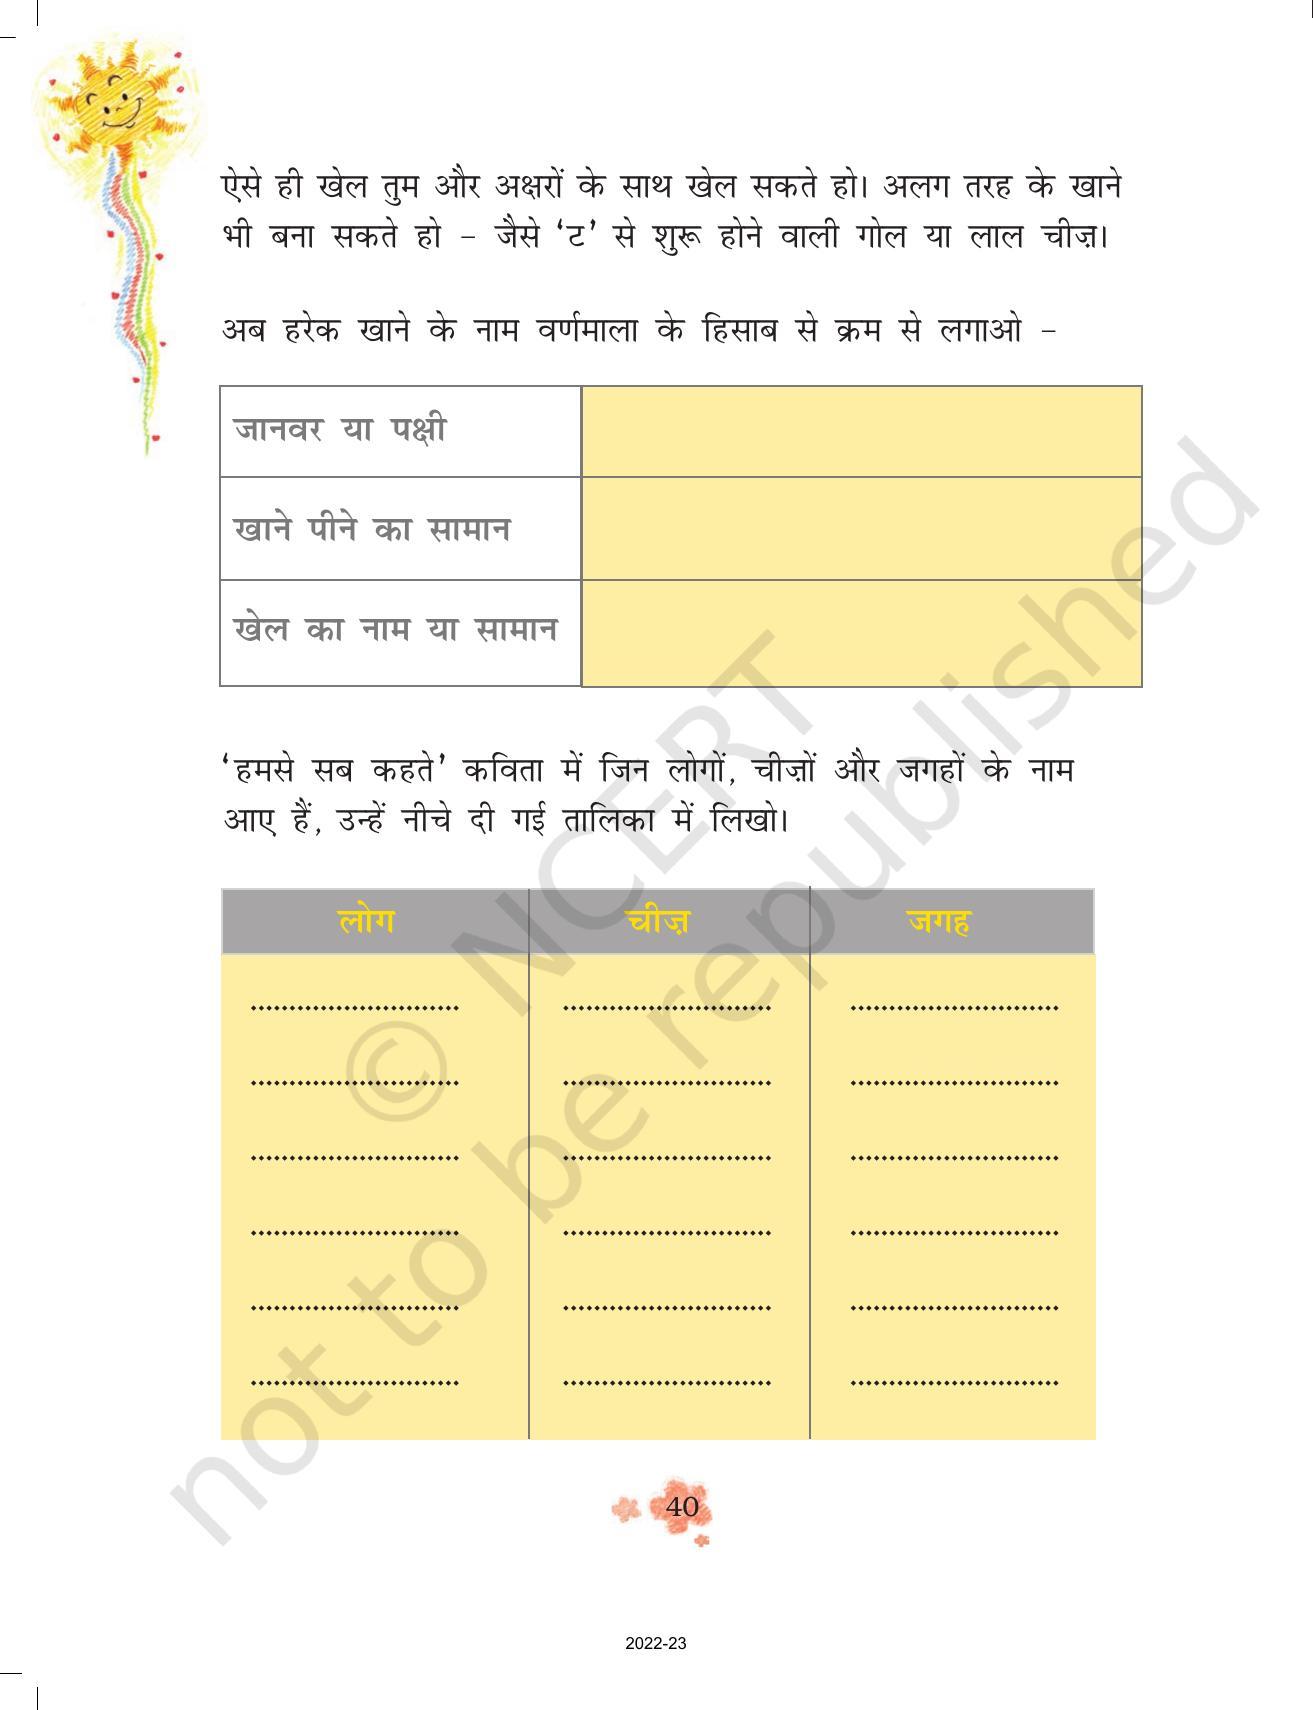 NCERT Book for Class 3 Hindi Chapter 5-हमसे सब कहते - Page 5